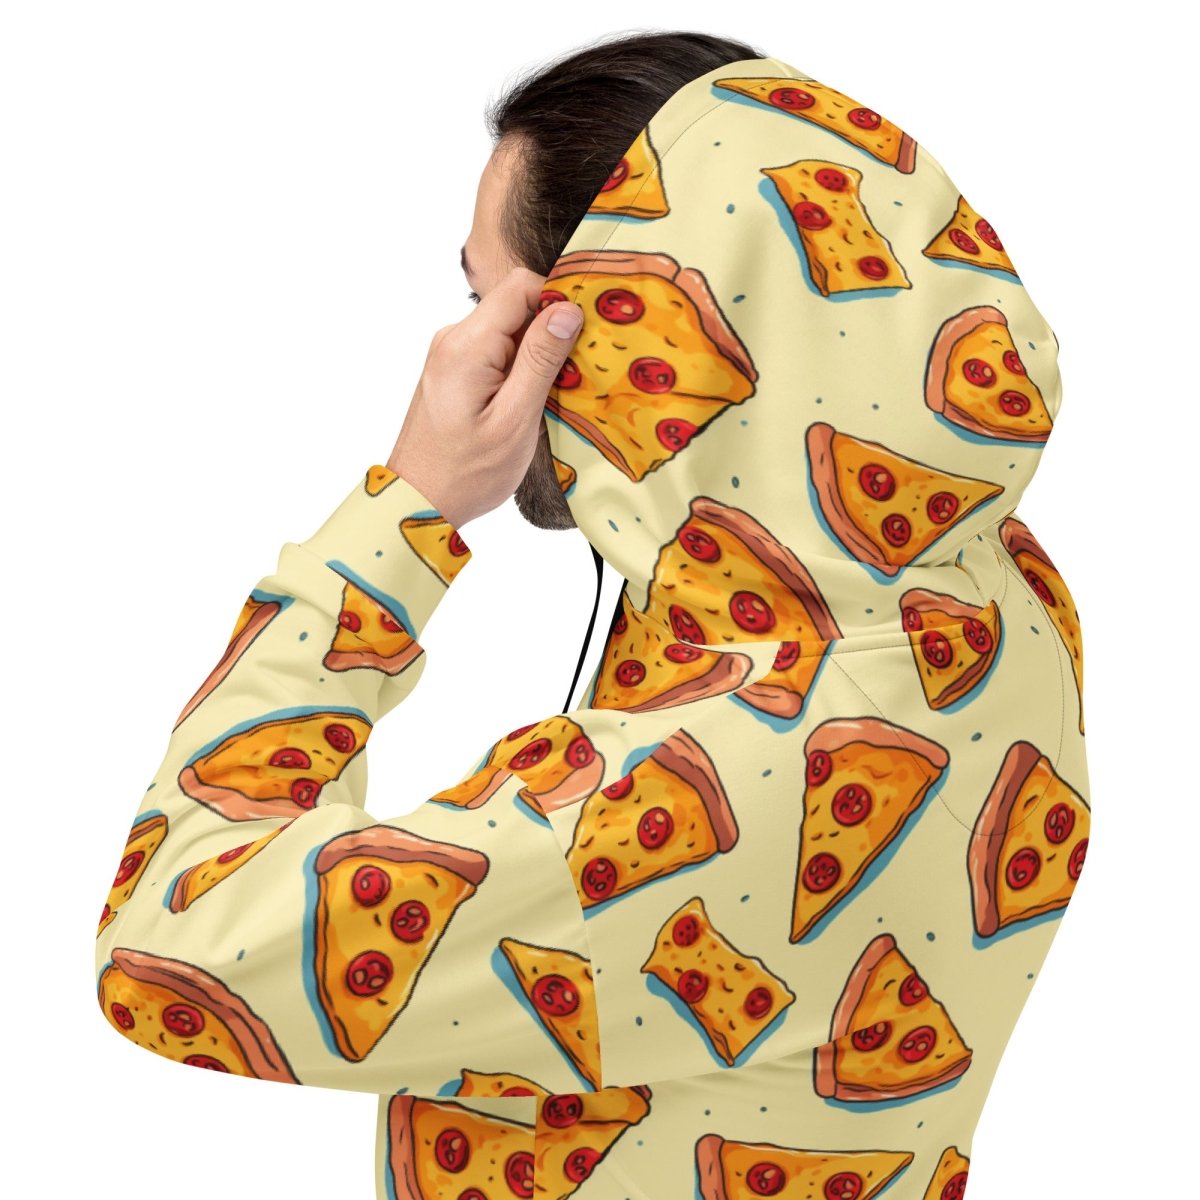 All - Over Print Pizza Slices Hoodie 2 (unisex) - M - AI Store